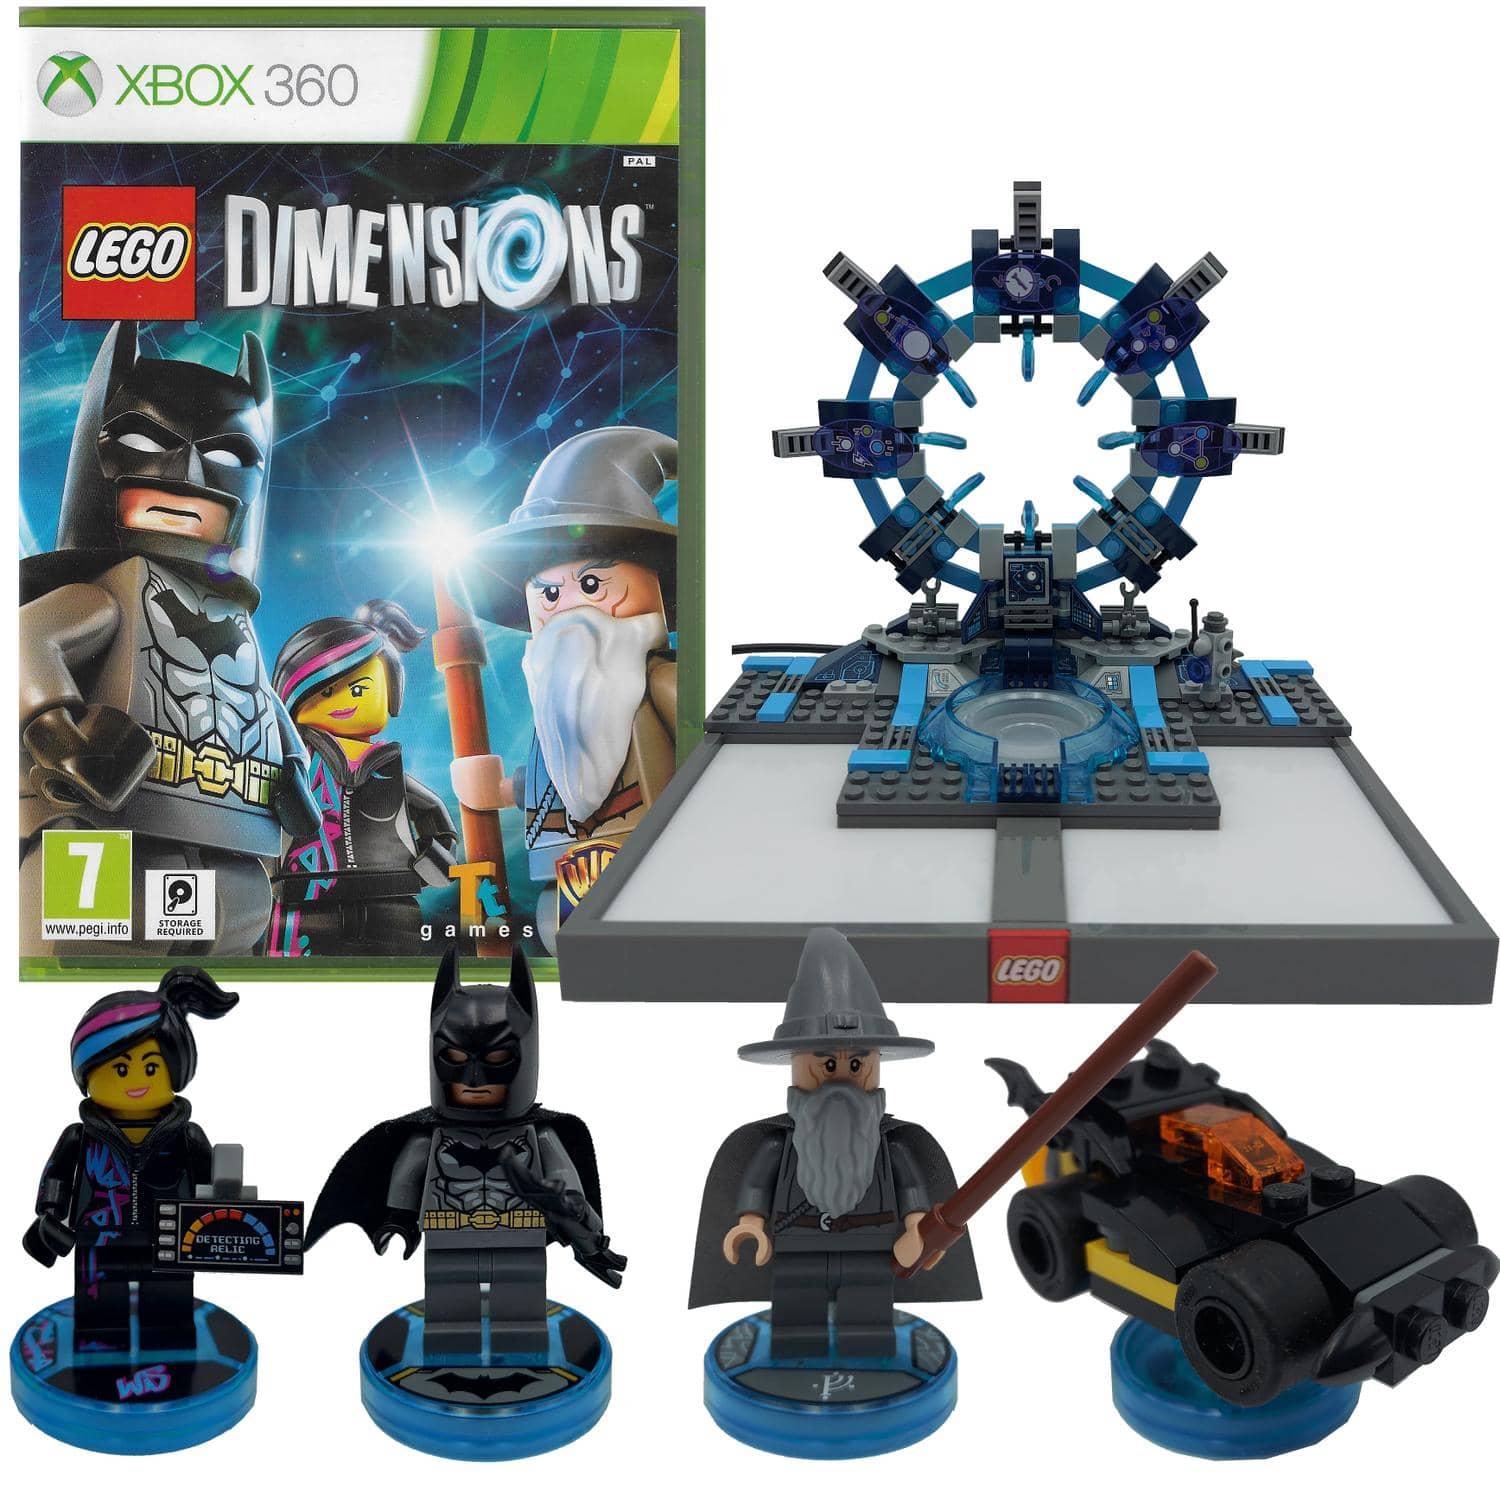 Lego Dimensions Starter Pack Xbox 360